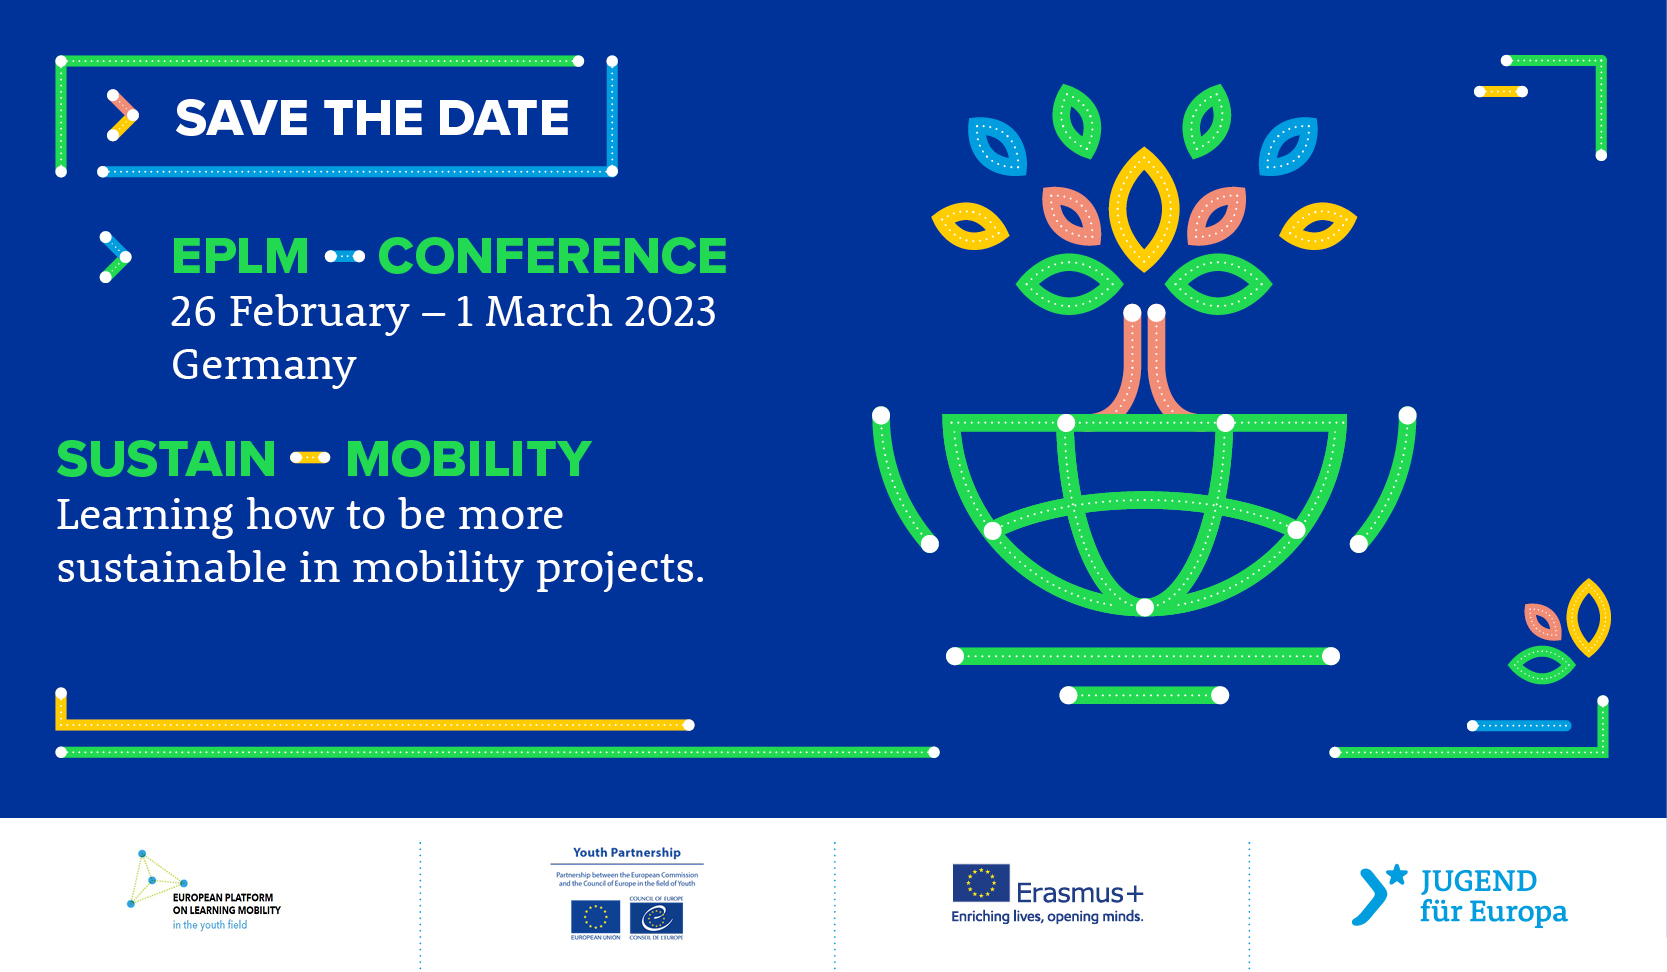 4th EPLM conference - SUSTAIN-MOBILITY